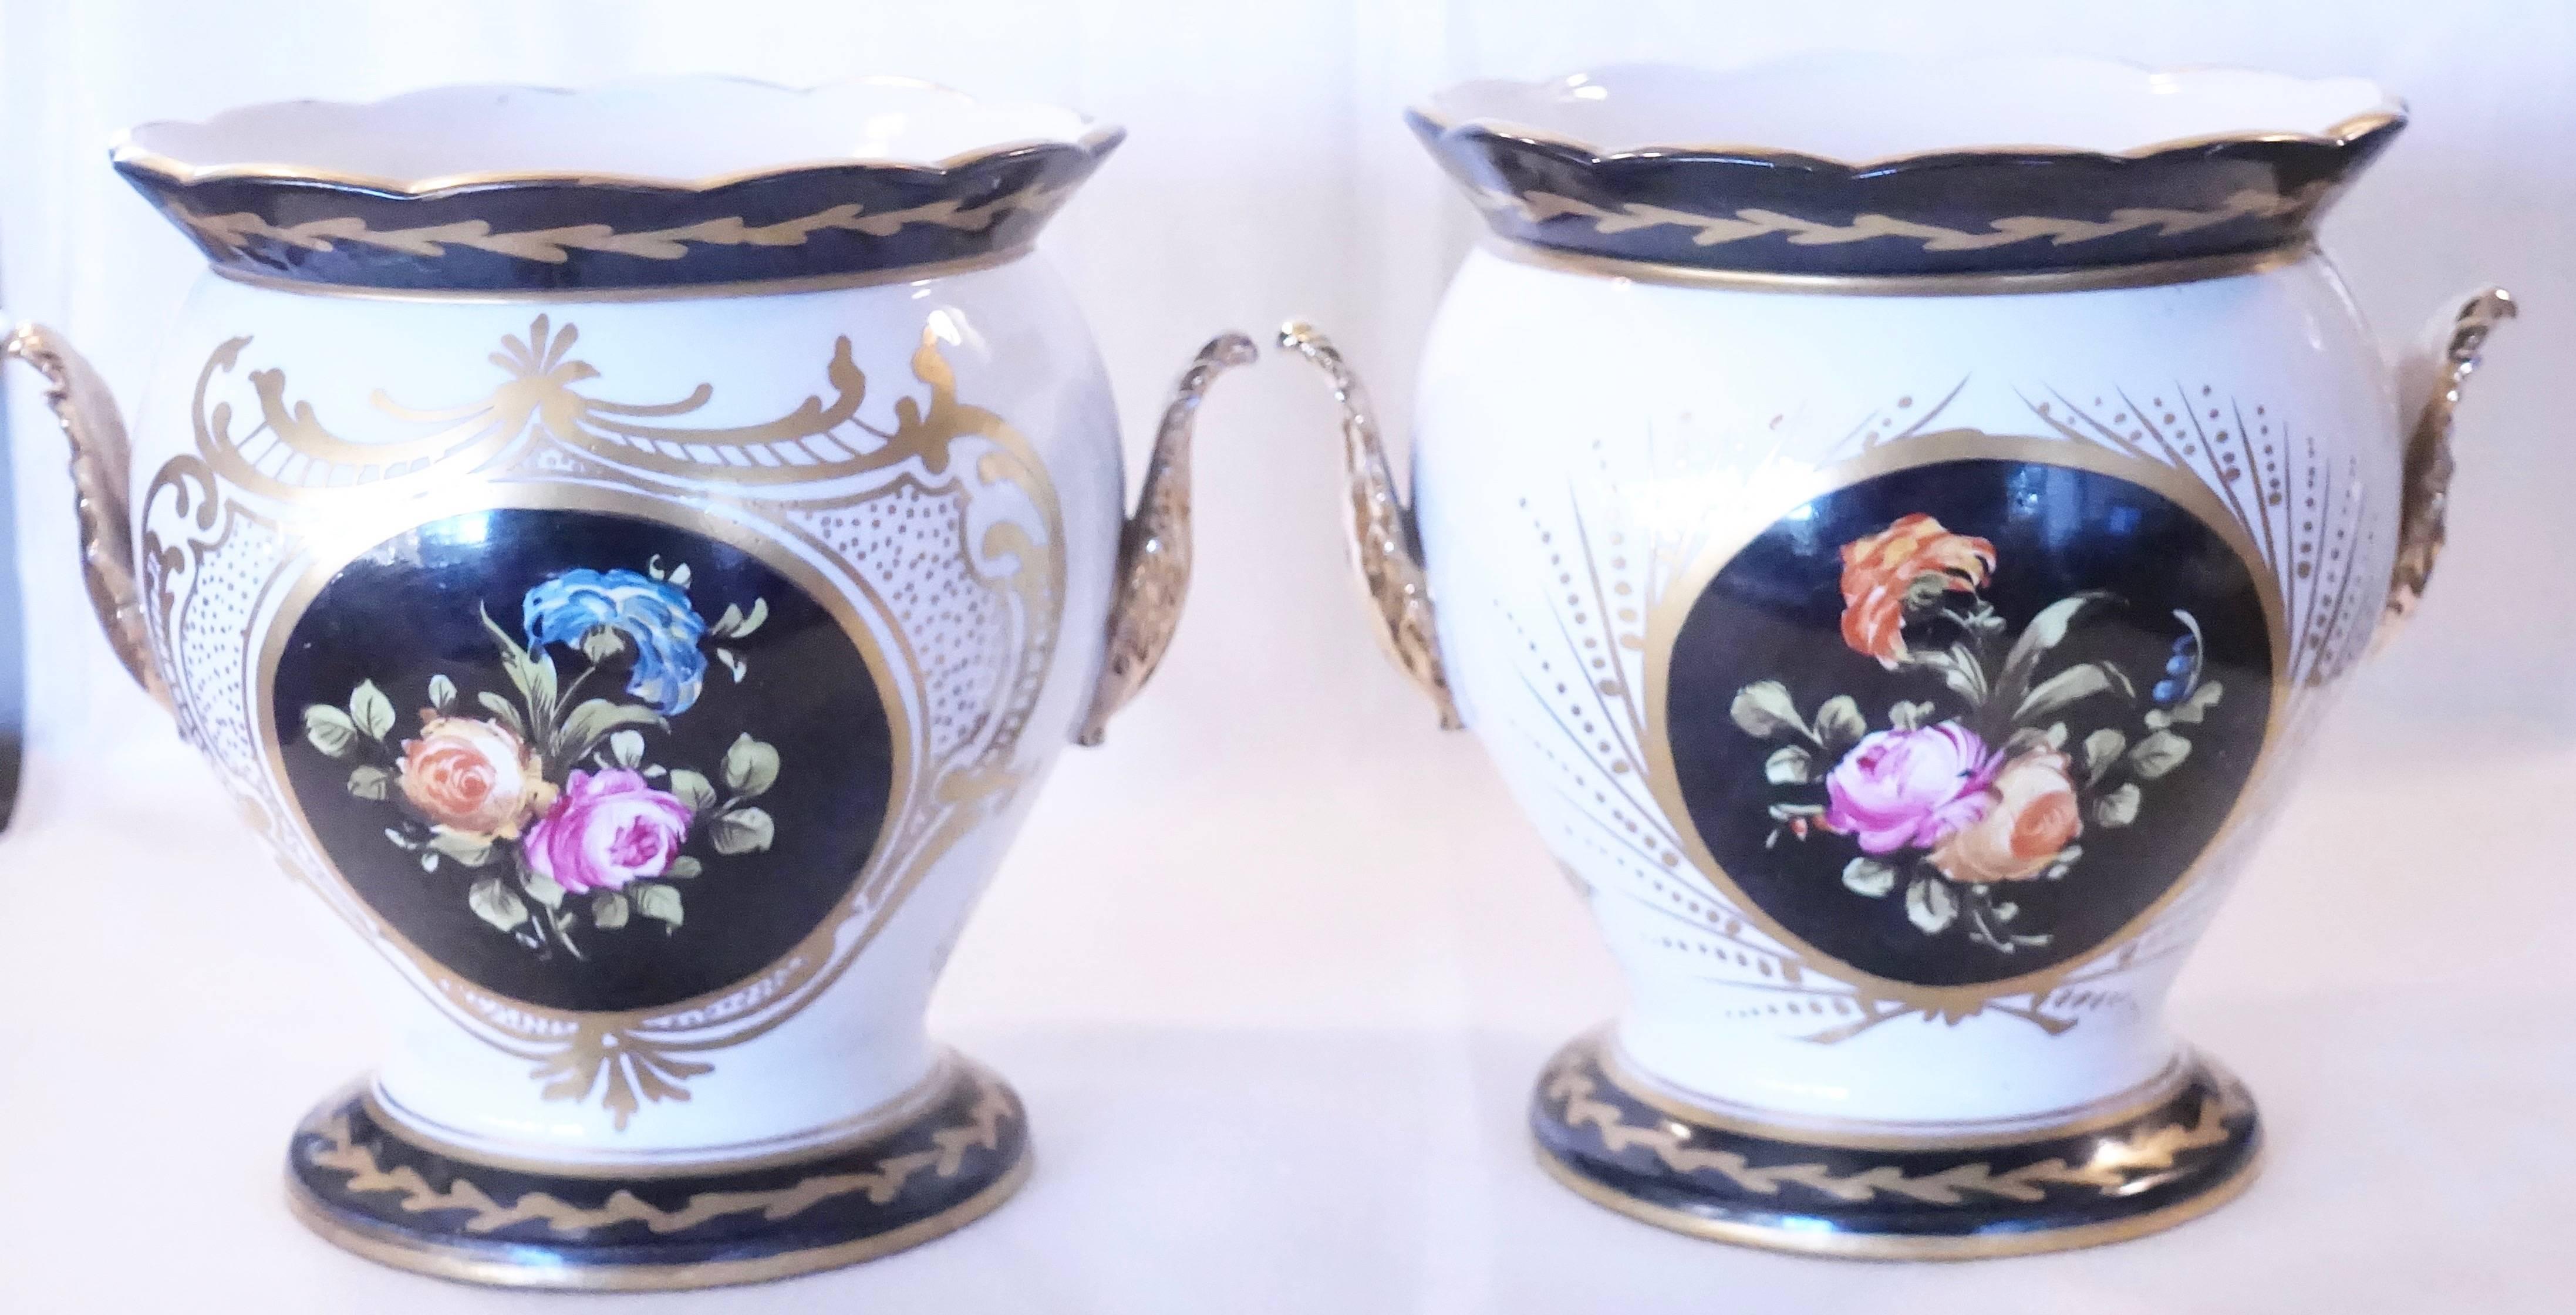 Very nice pair of hand-painted Paris Porcelain planters\cachepots with hand-painted flowers on both sides, the two sides have gold cartouche that are of differing design and gilt acanthus leaf handles, French, circa 1880.